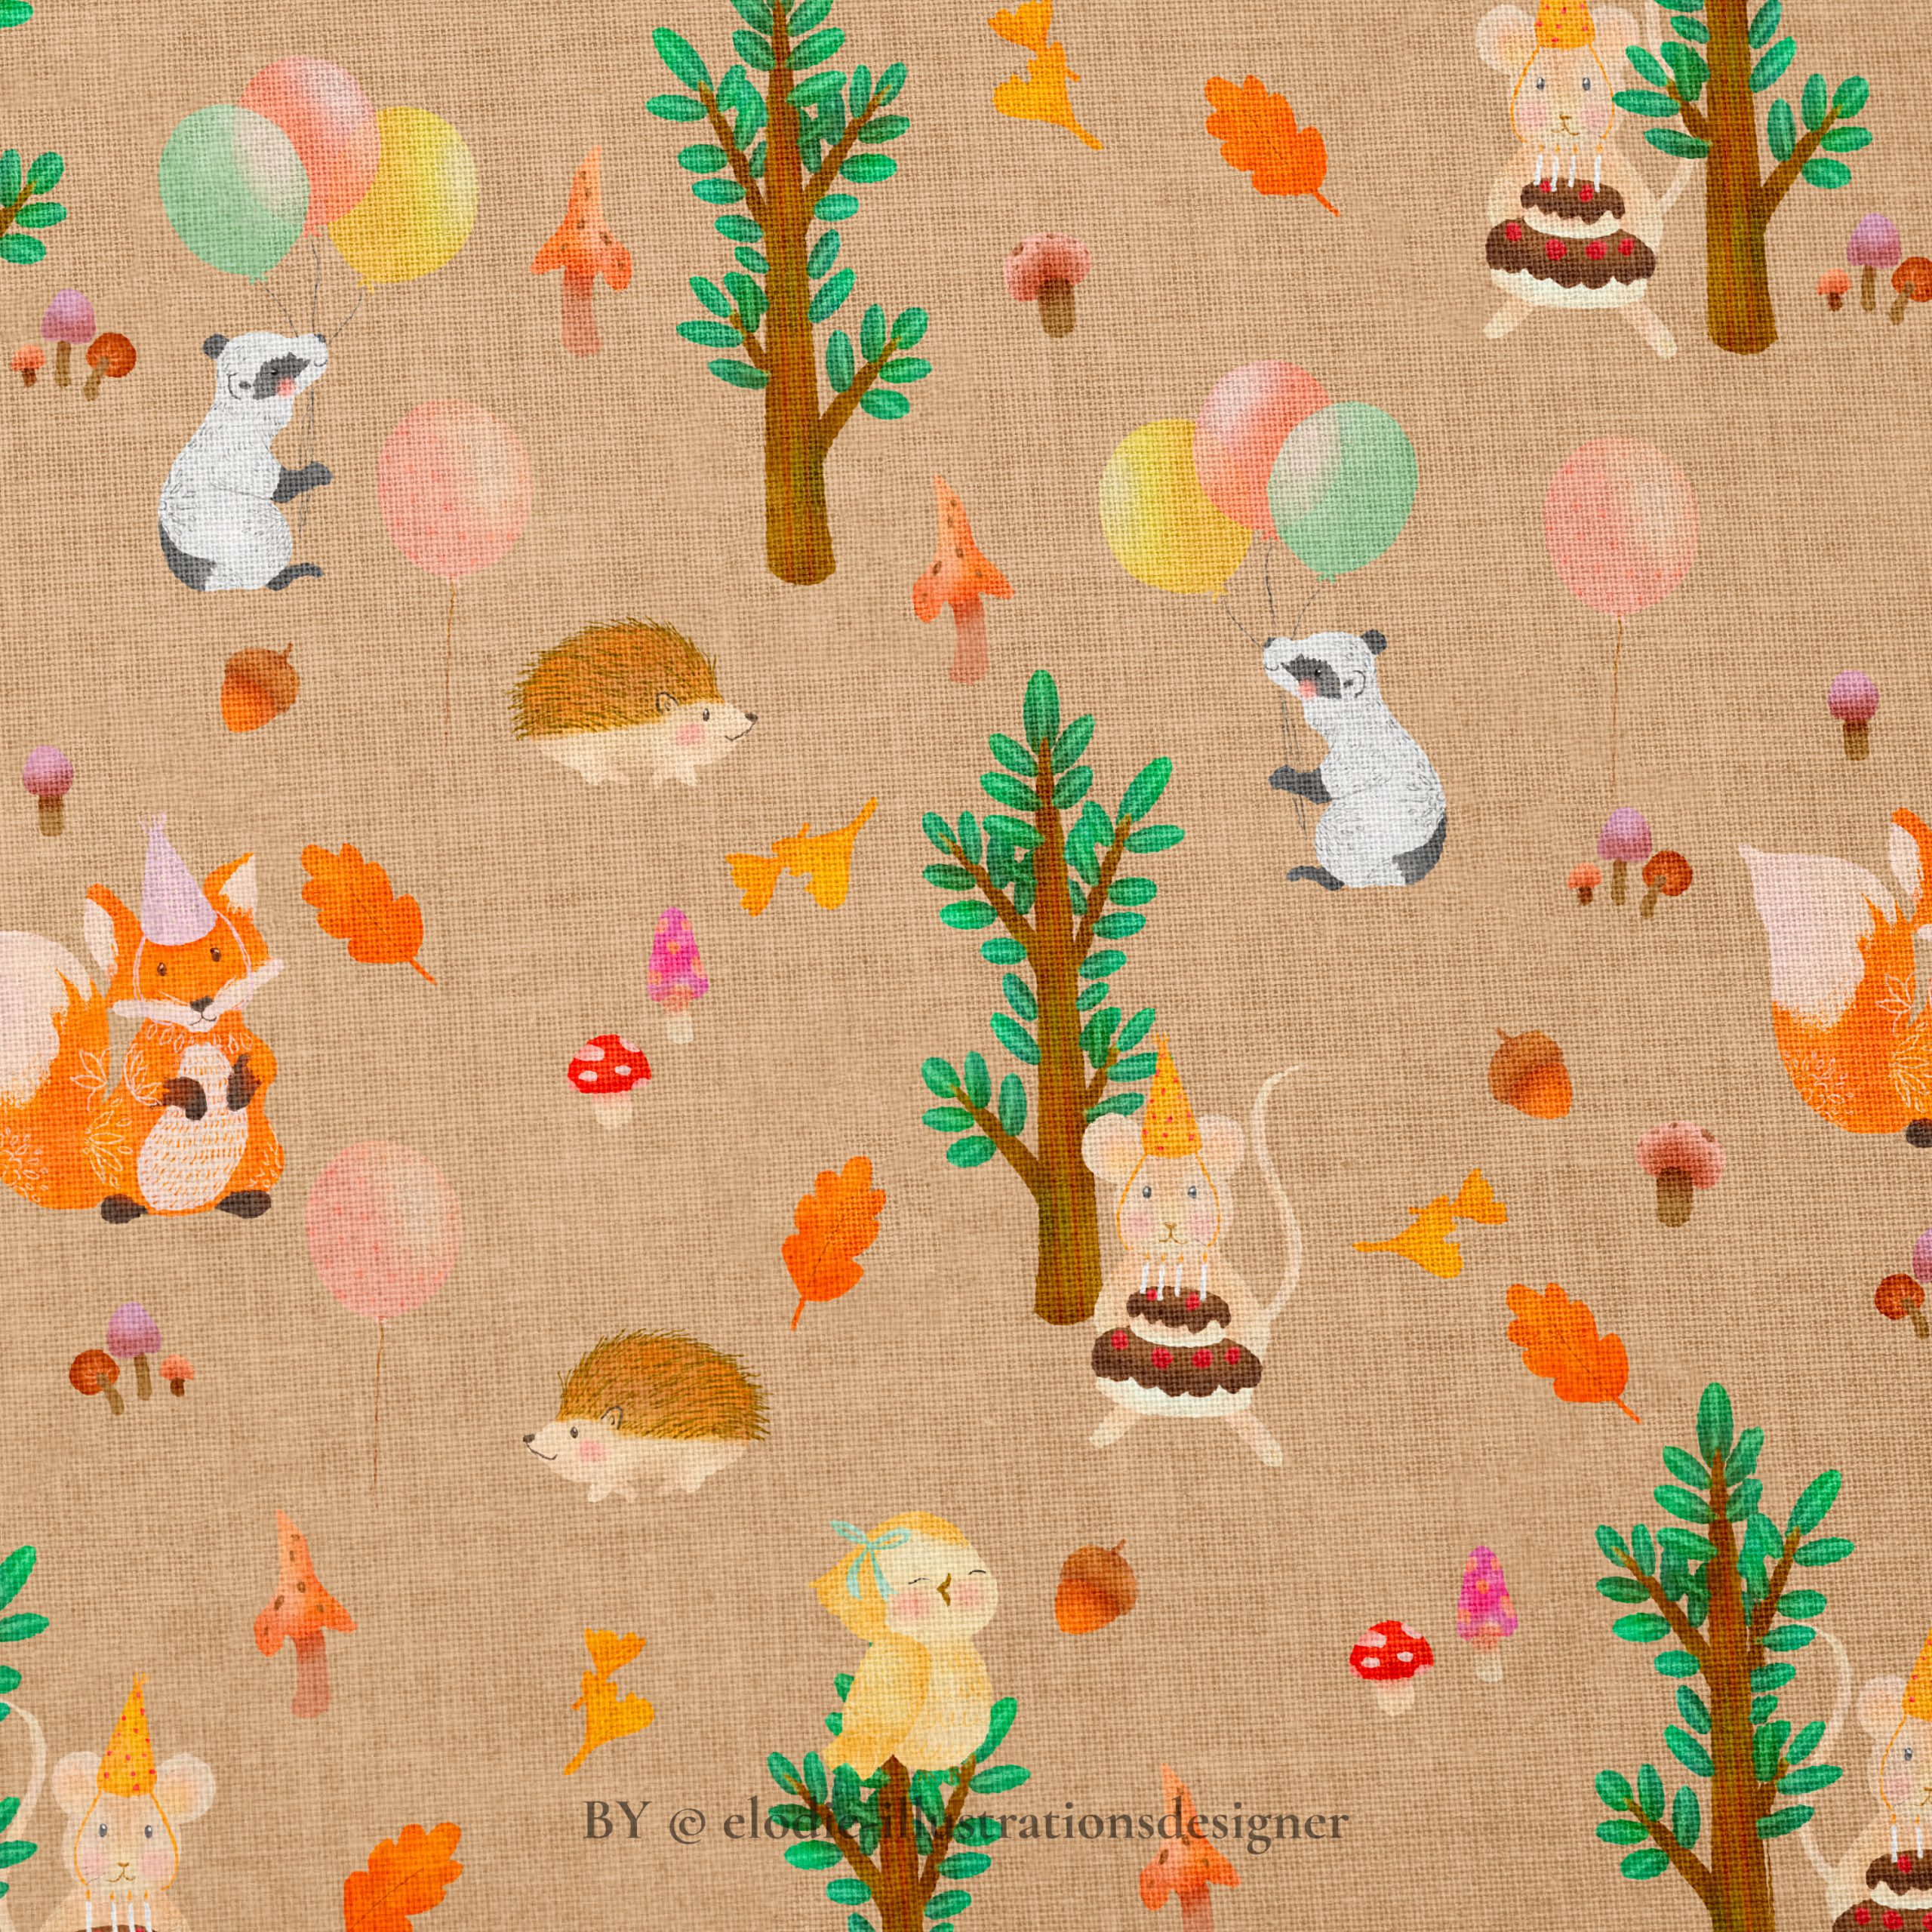 TEXTILES PATTERNS  "WOODLAND BIRTHDAY COLLECTION"